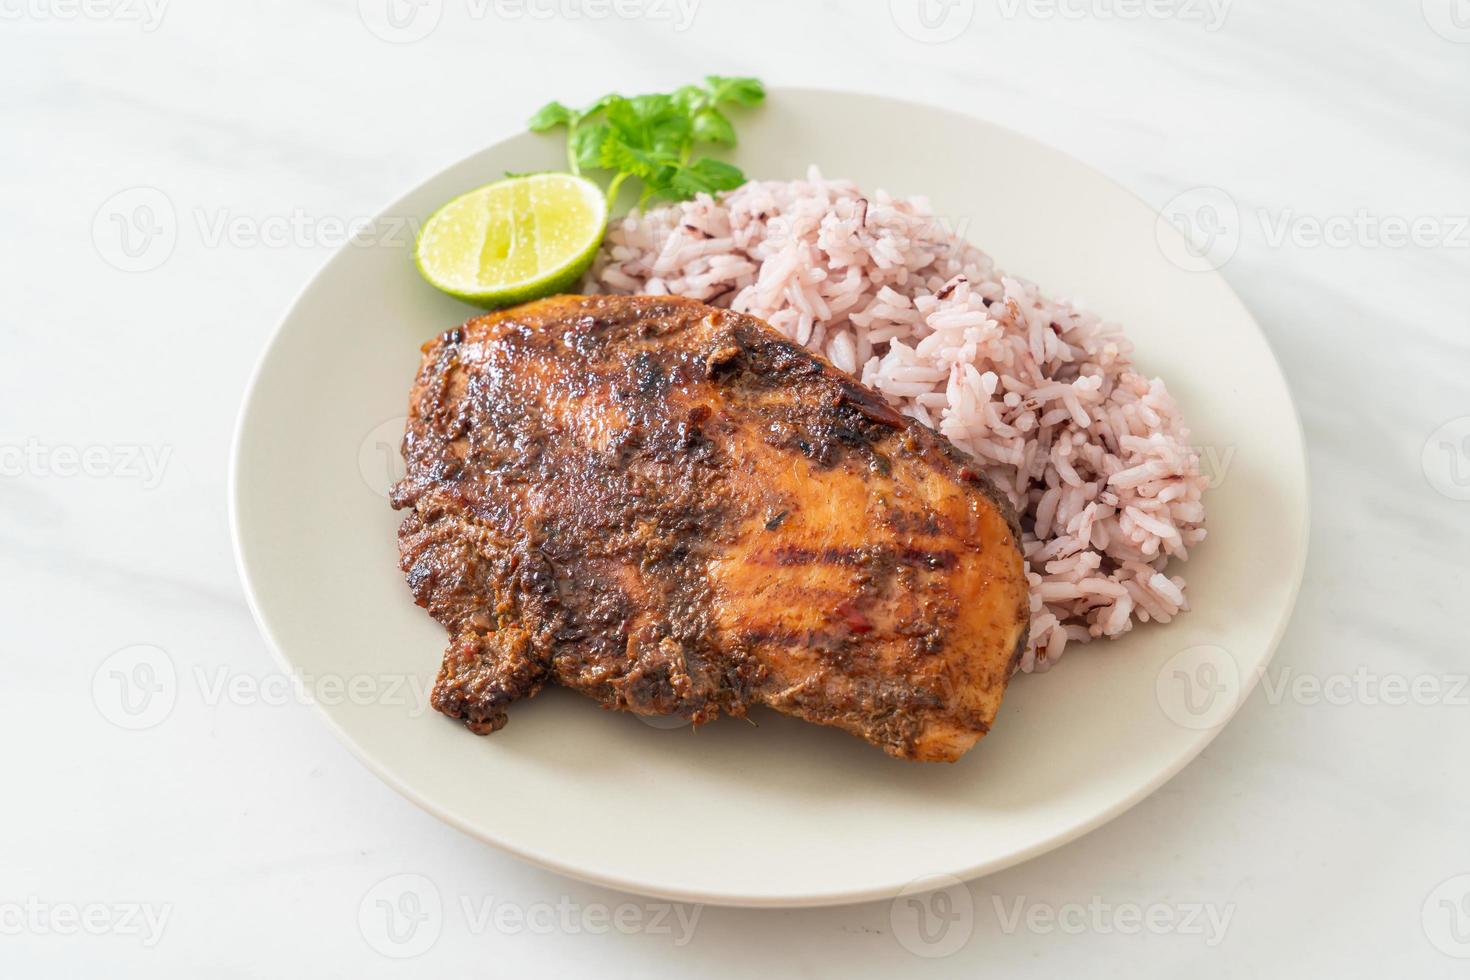 Spicy grilled Jamaican jerk chicken with rice - Jamaican food style photo